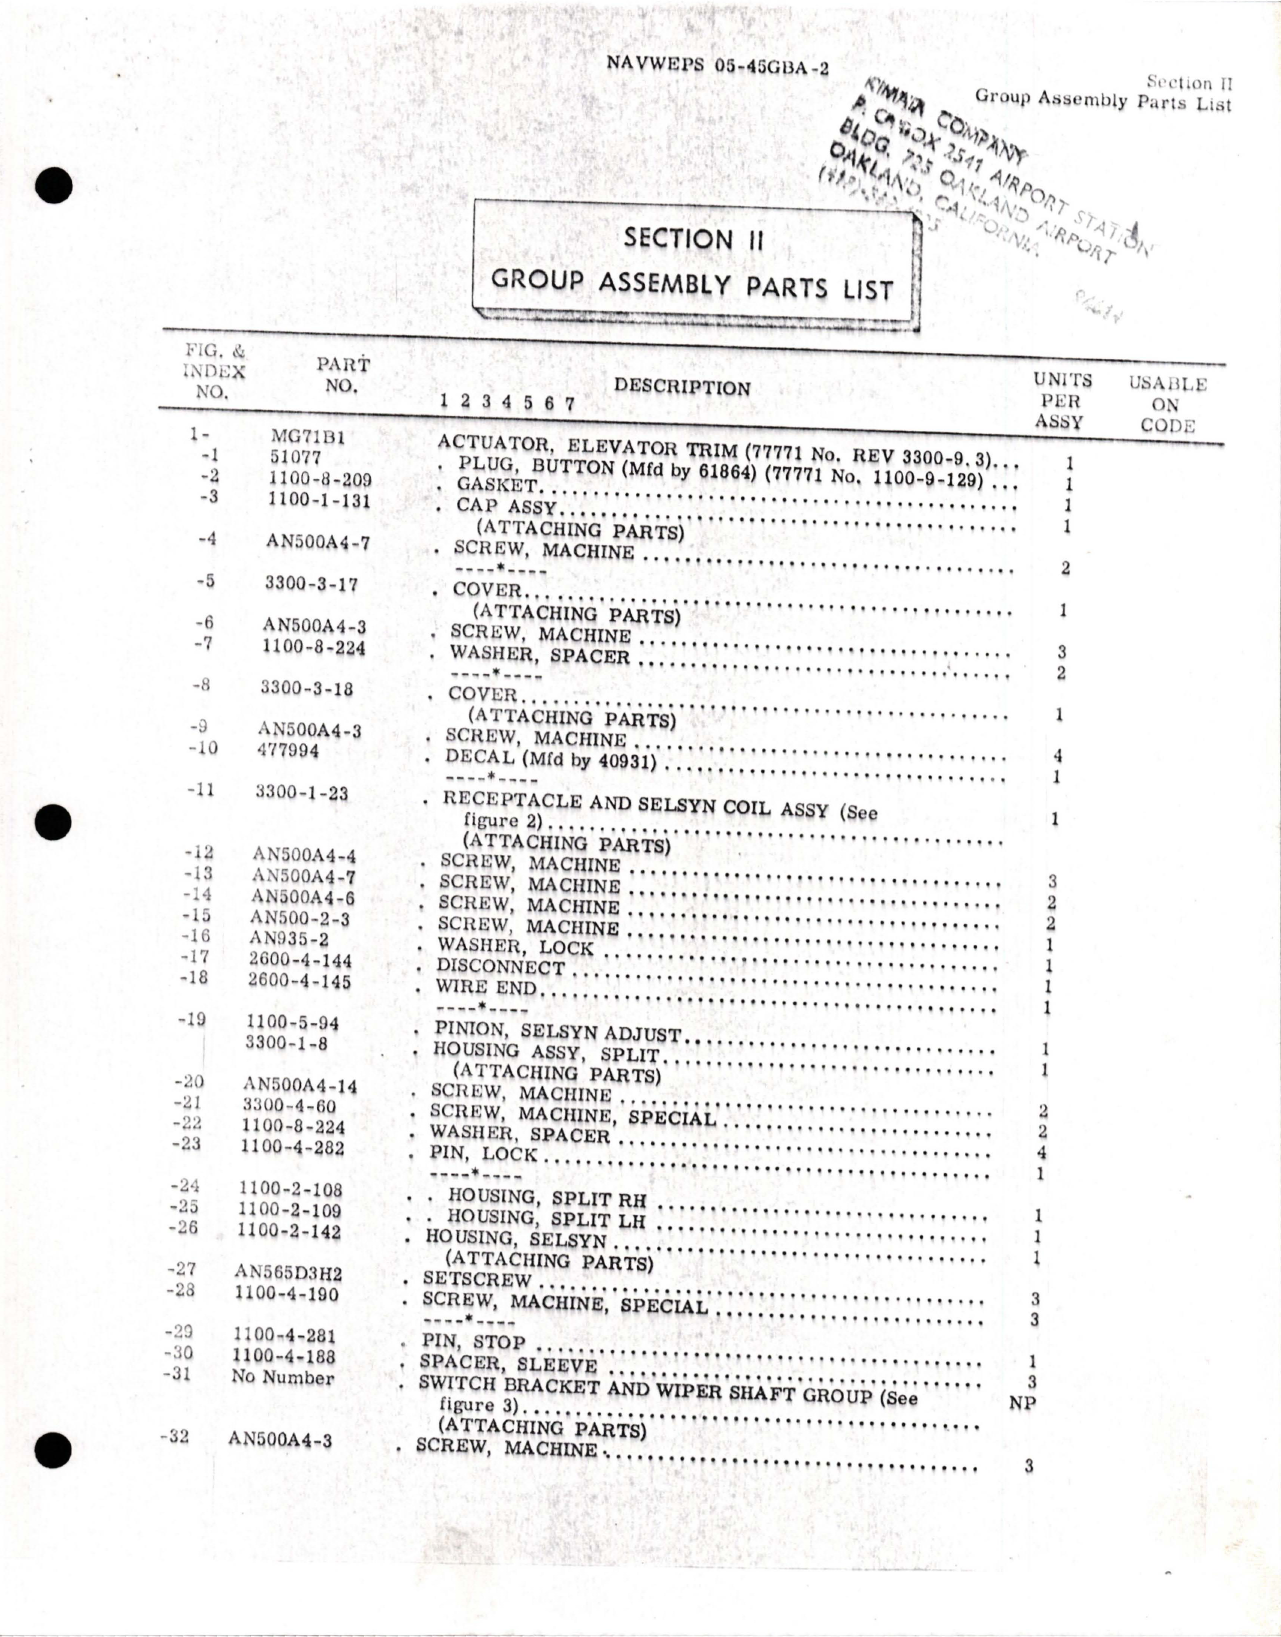 Sample page 5 from AirCorps Library document: Illustrated Parts Breakdown for Elevator Trim Actuator - MG71B1